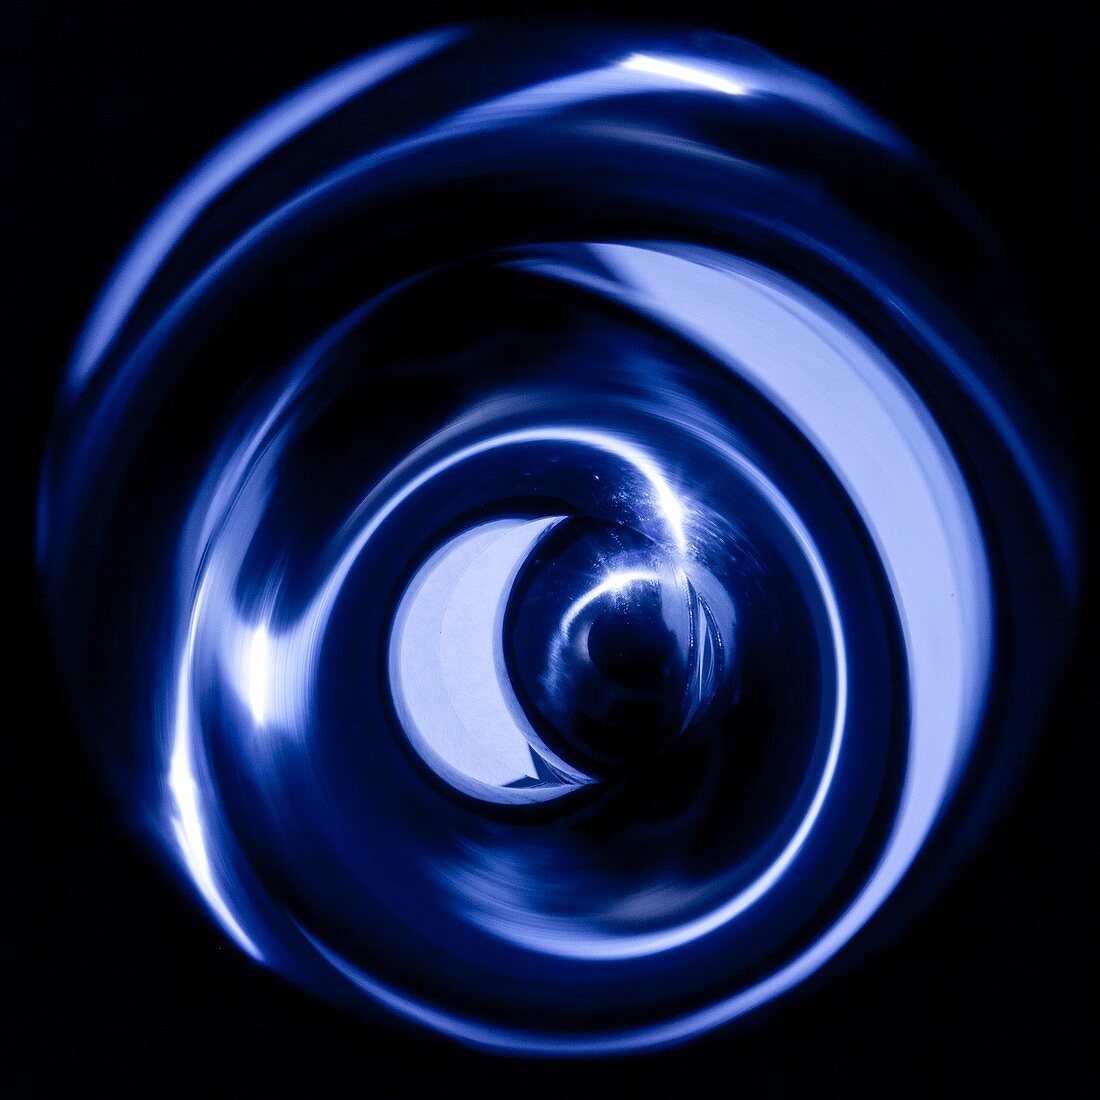 Reflection inside a neutron guide, abstract image